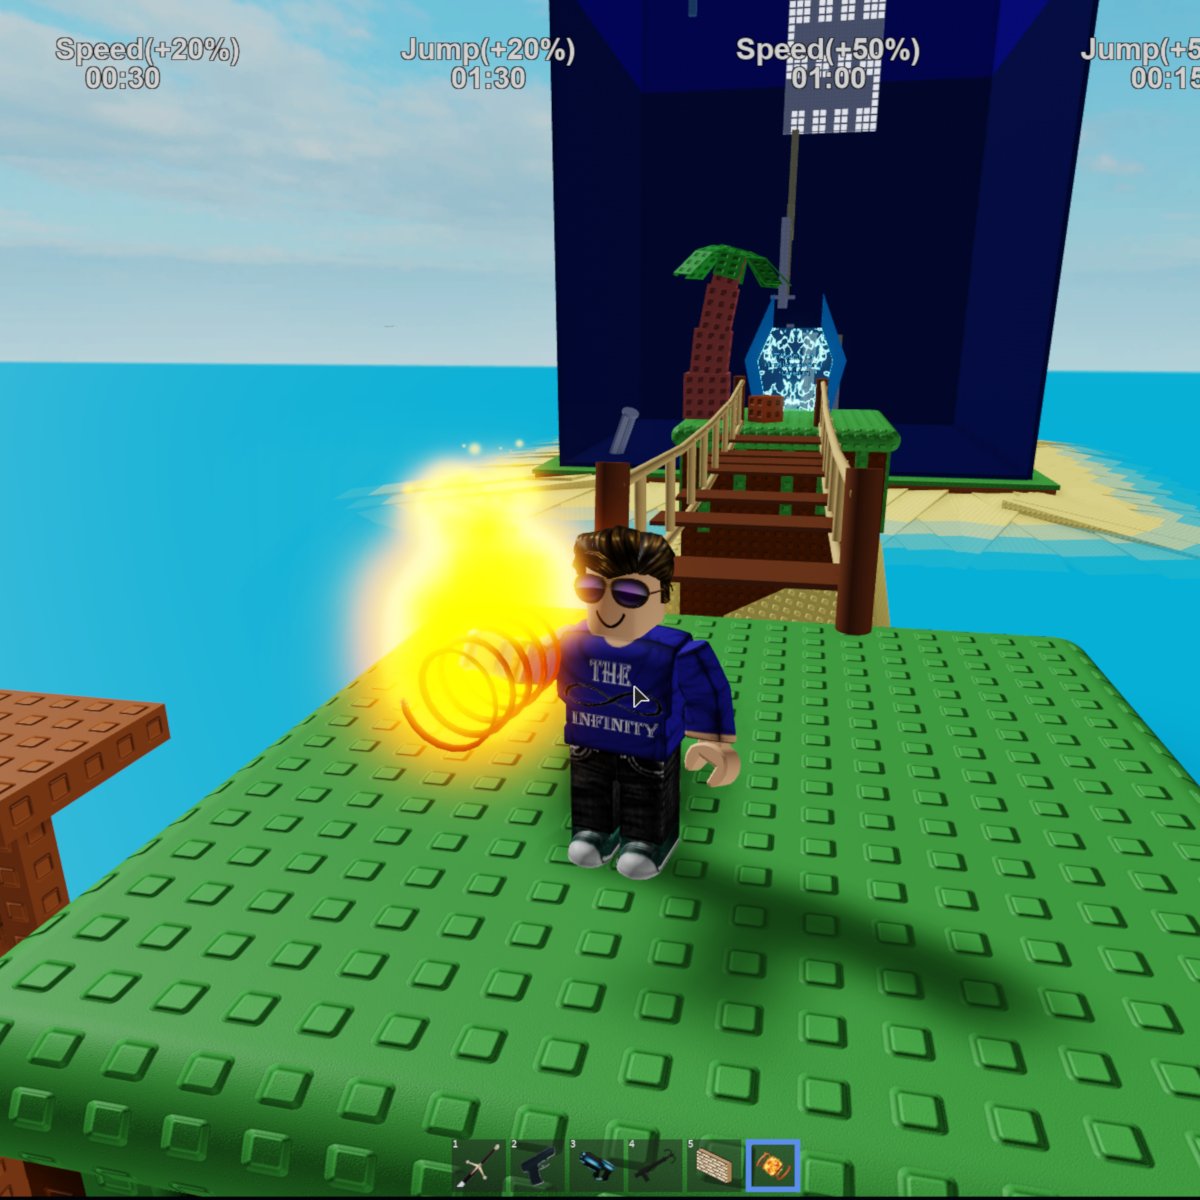 Supernooblox On Twitter Summerevent I Got Summer Coil Which Increase 20 Jump And 20 Speed It Is Free Once You Complete 4 Event Towers Https T Co 8nemfewxfg Roblox Robloxdev ロブロックス Https T Co 3slvl7stiq - jump coil roblox